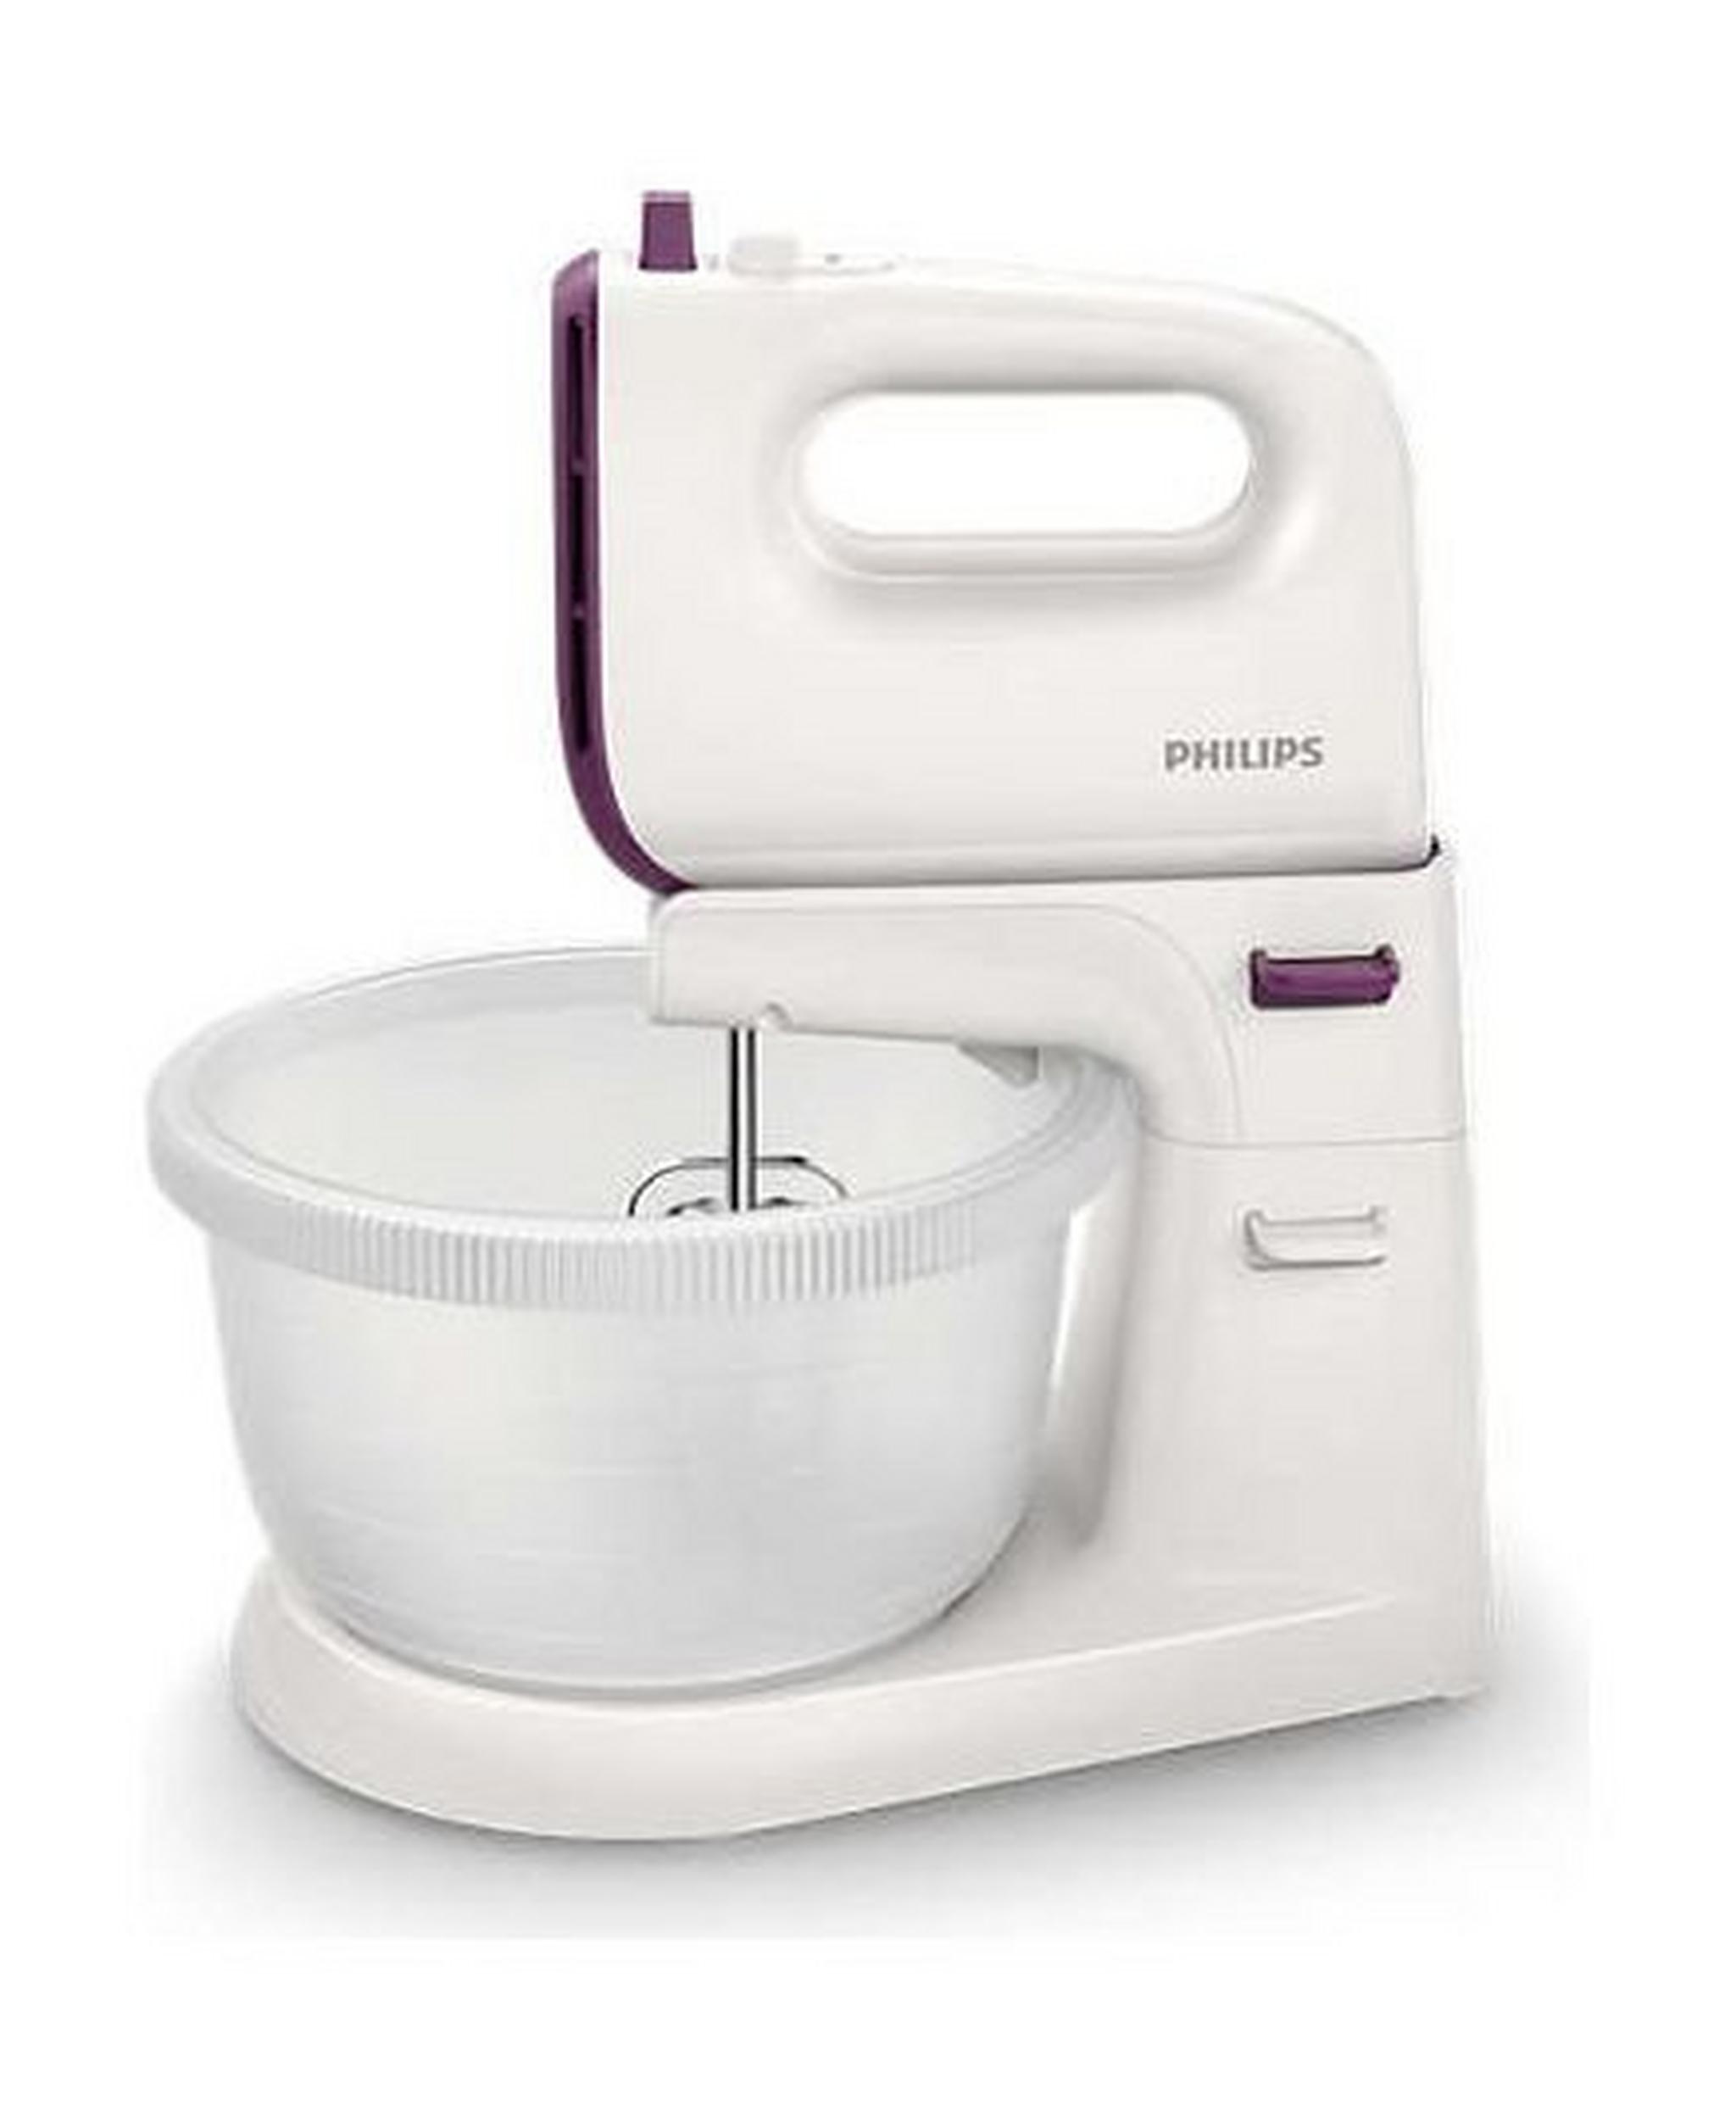 Philips Viva Collection Stand Mixer, 400W, 3L, HR3740/11 - White